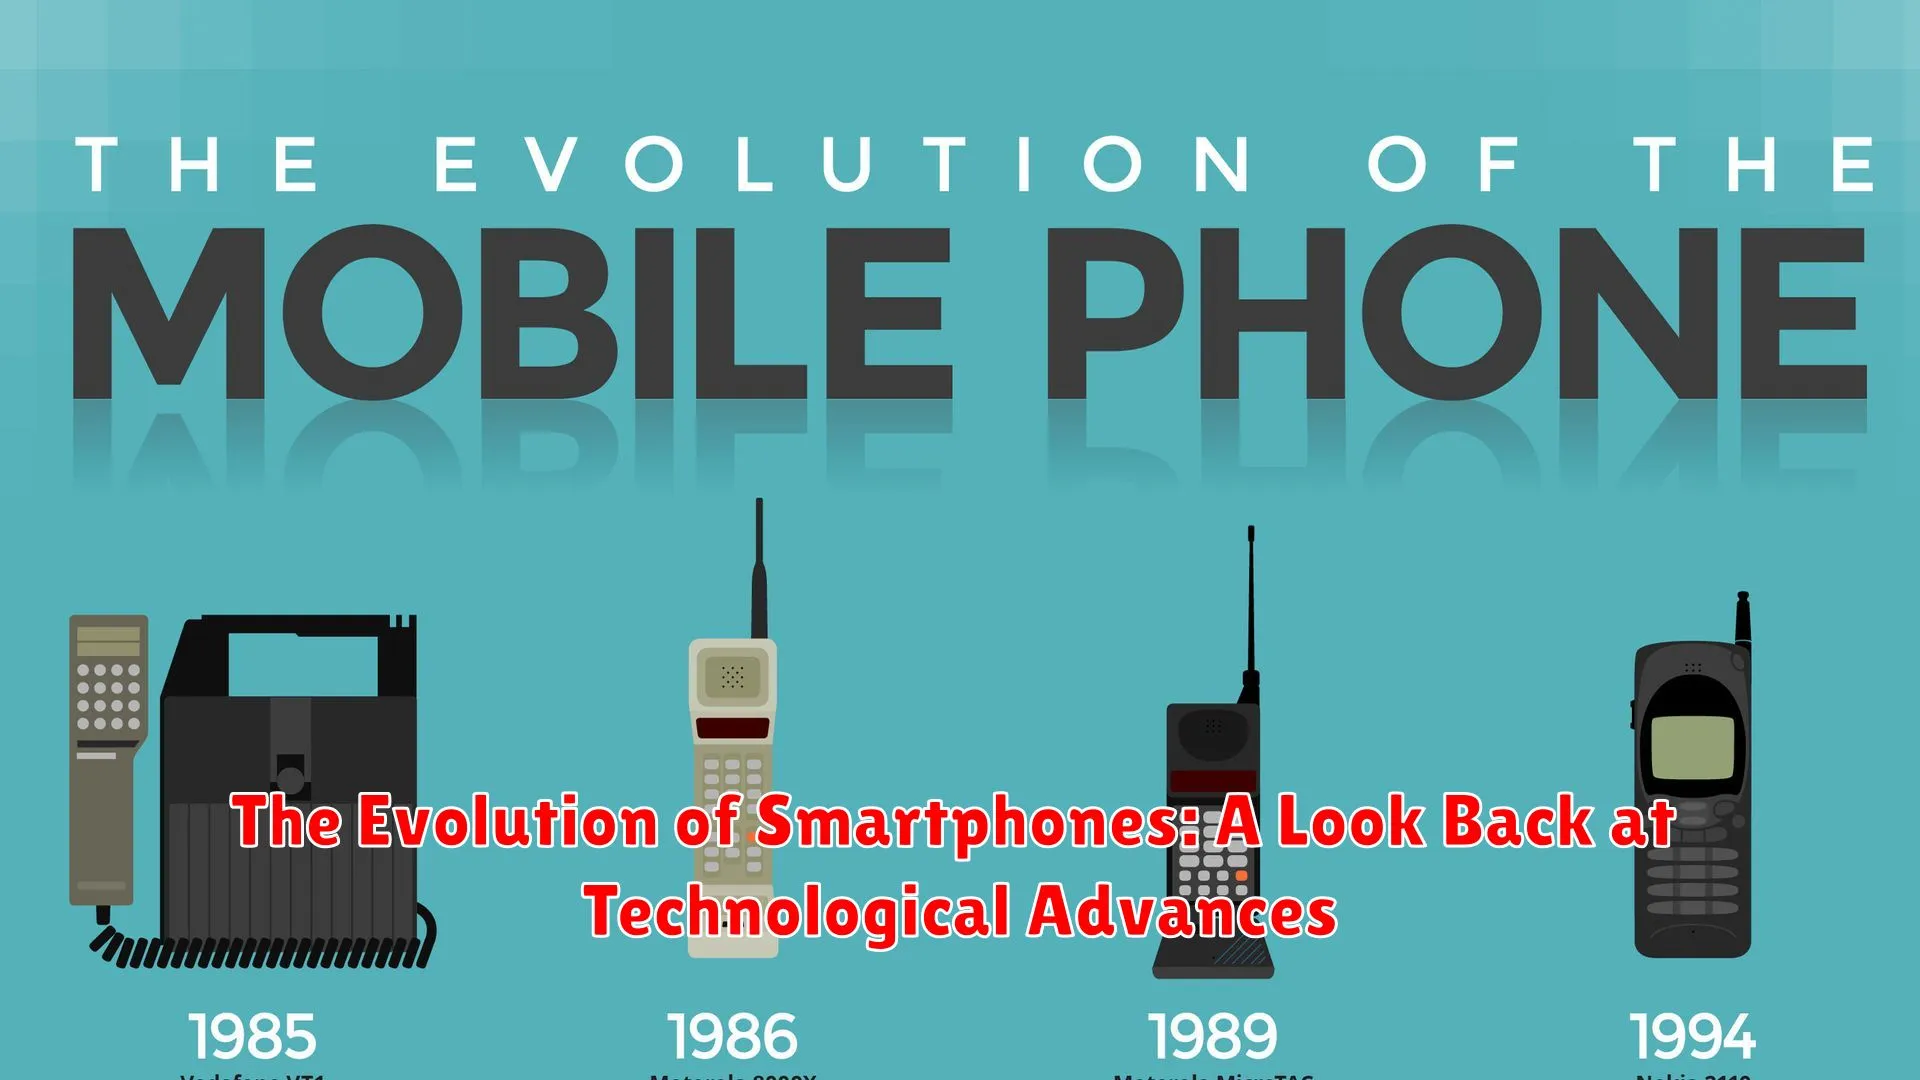 The Evolution of Smartphones: A Look Back at Technological Advances